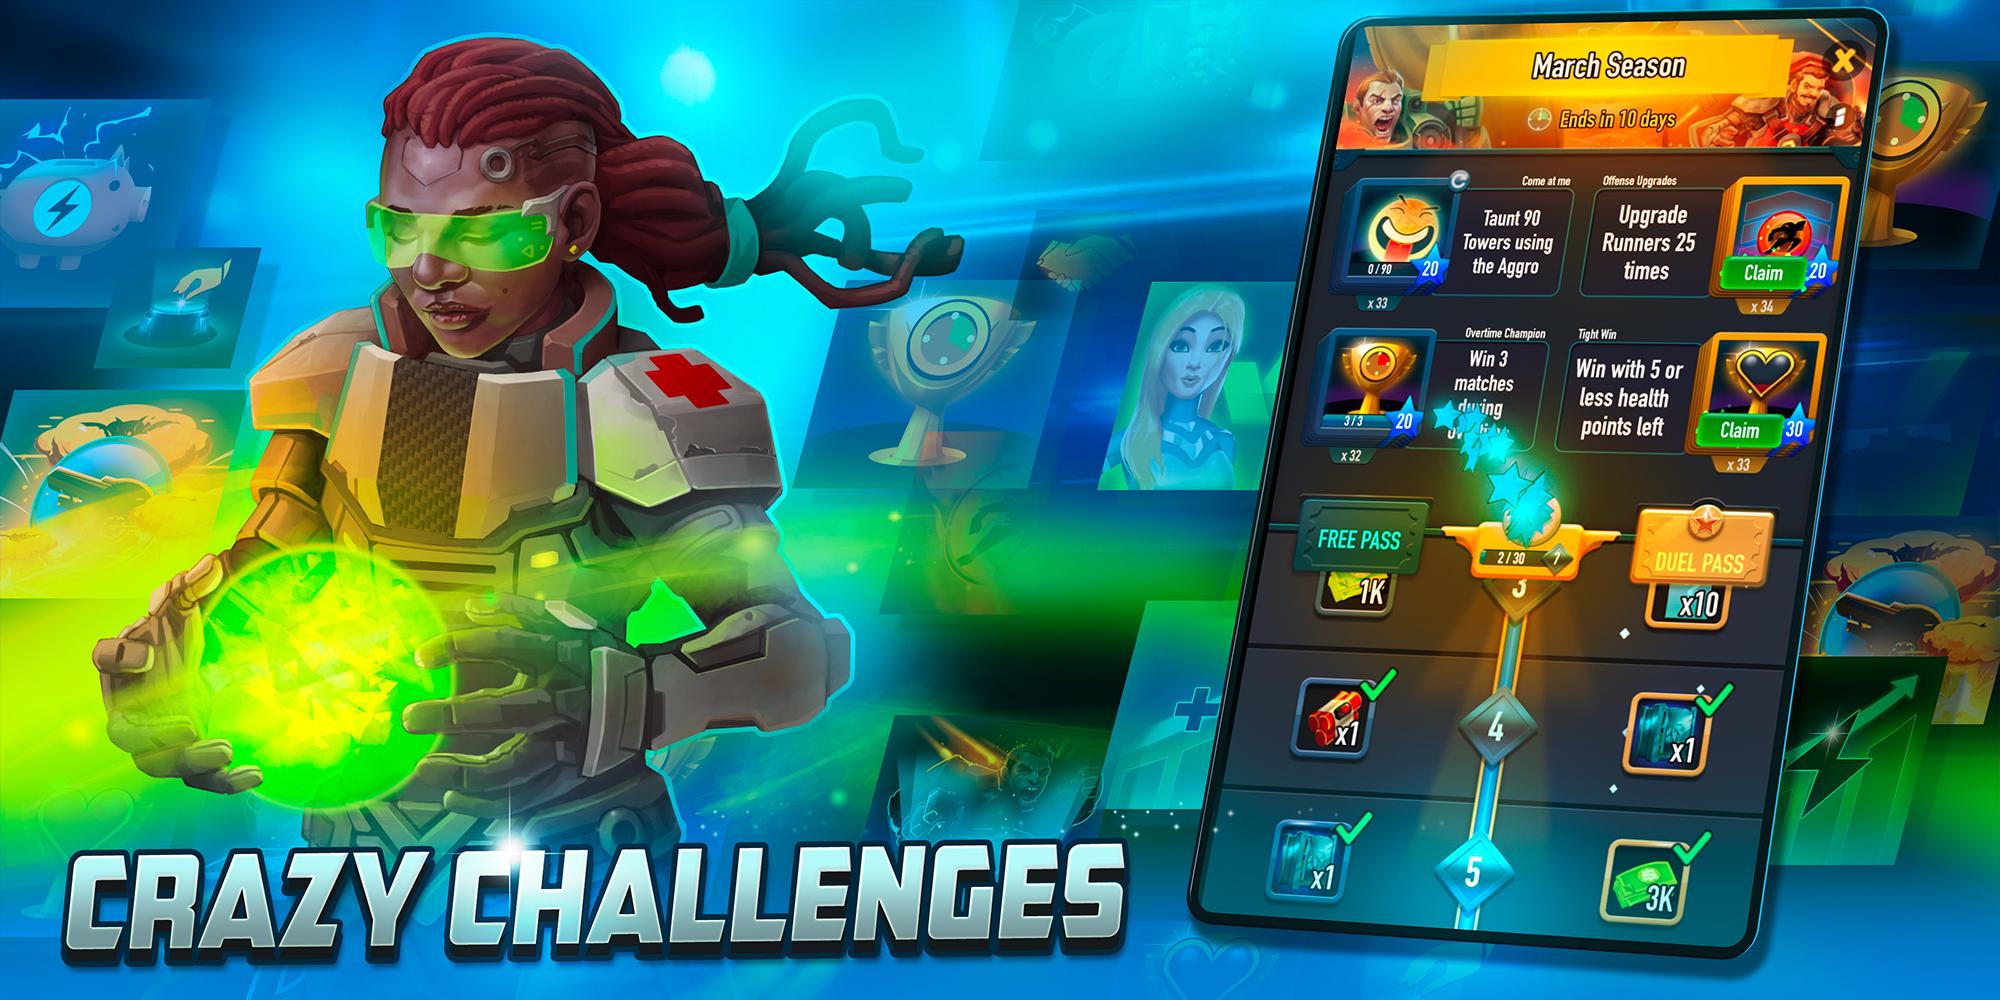 Tower Duel For Android Apk Download - roblox 2 450 411874 download for android apk free